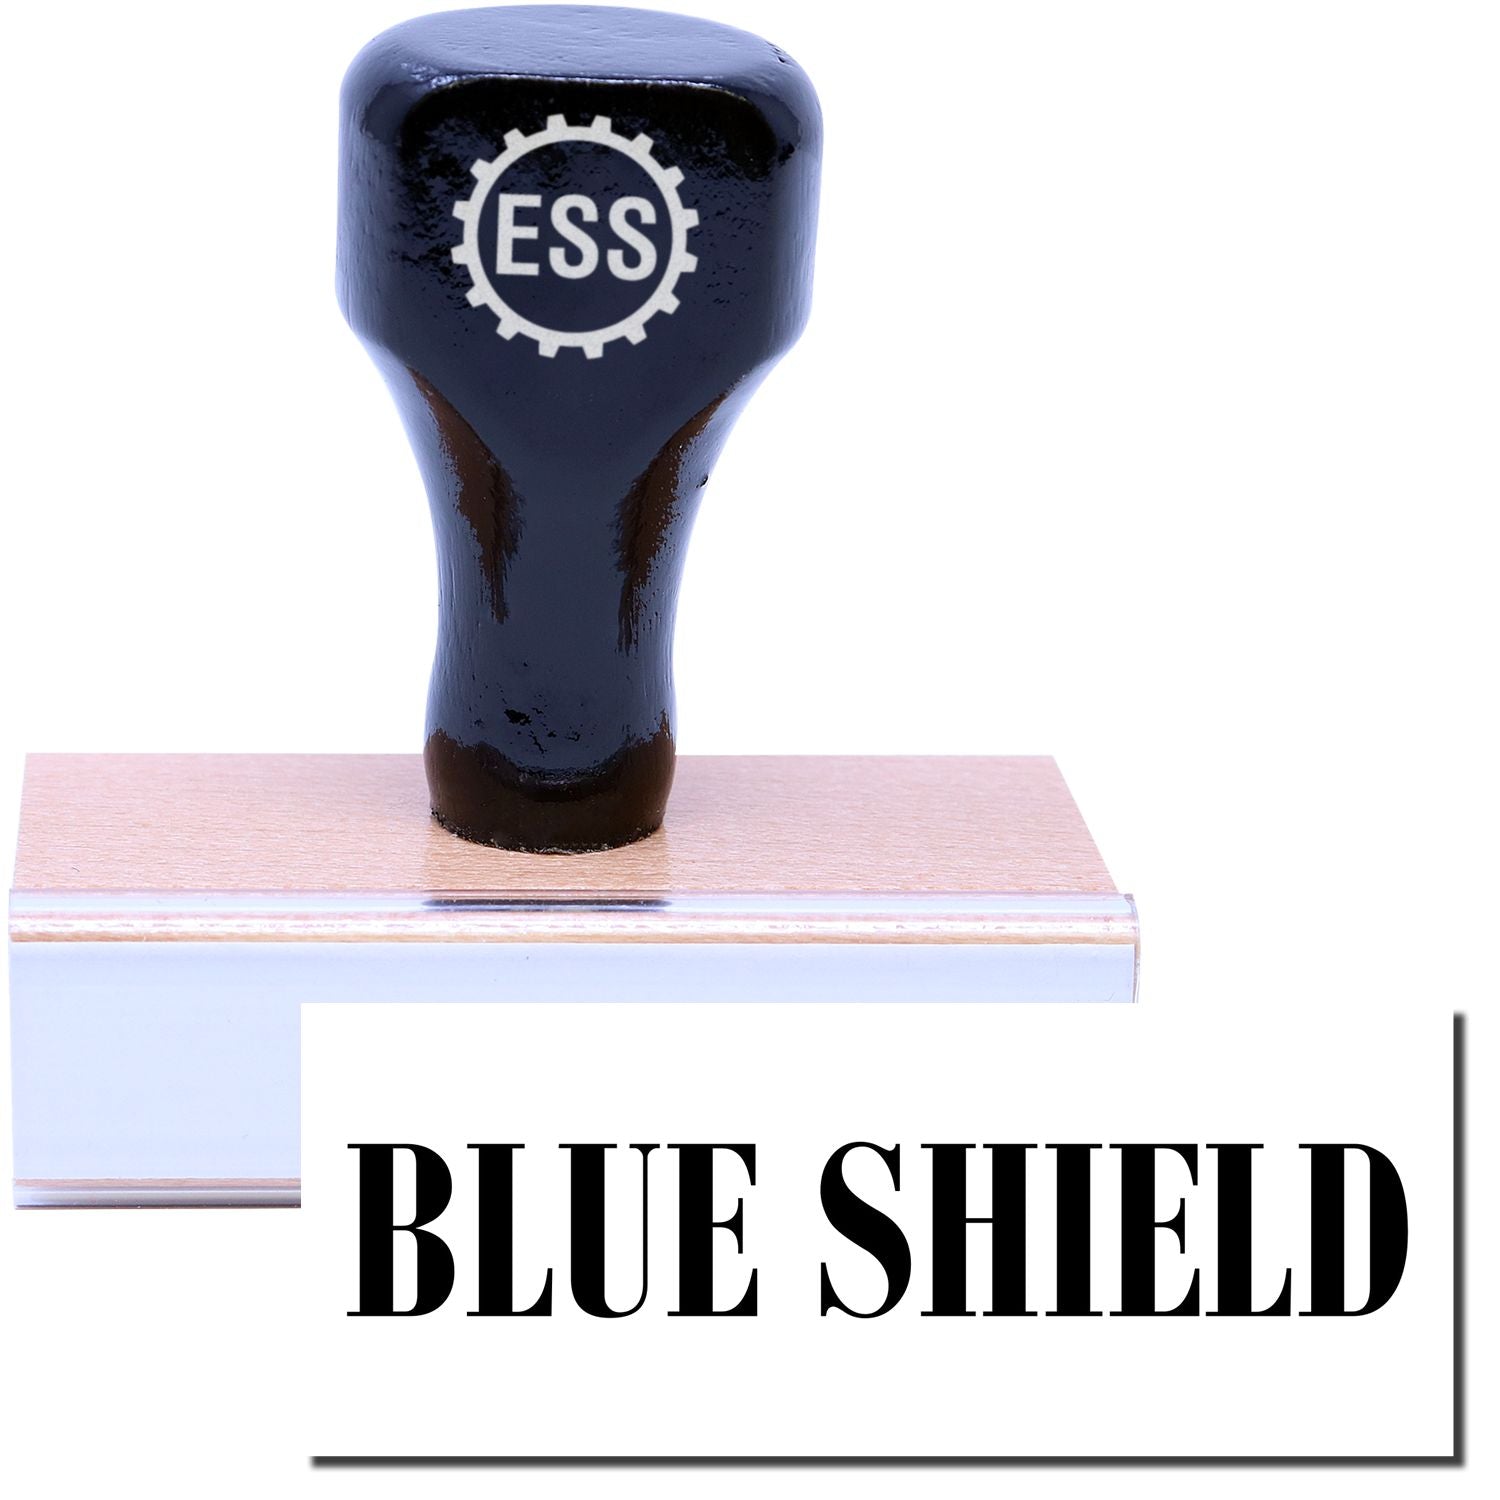 A stock office medical rubber stamp with a stamped image showing how the text "BLUE SHIELD" is displayed after stamping.